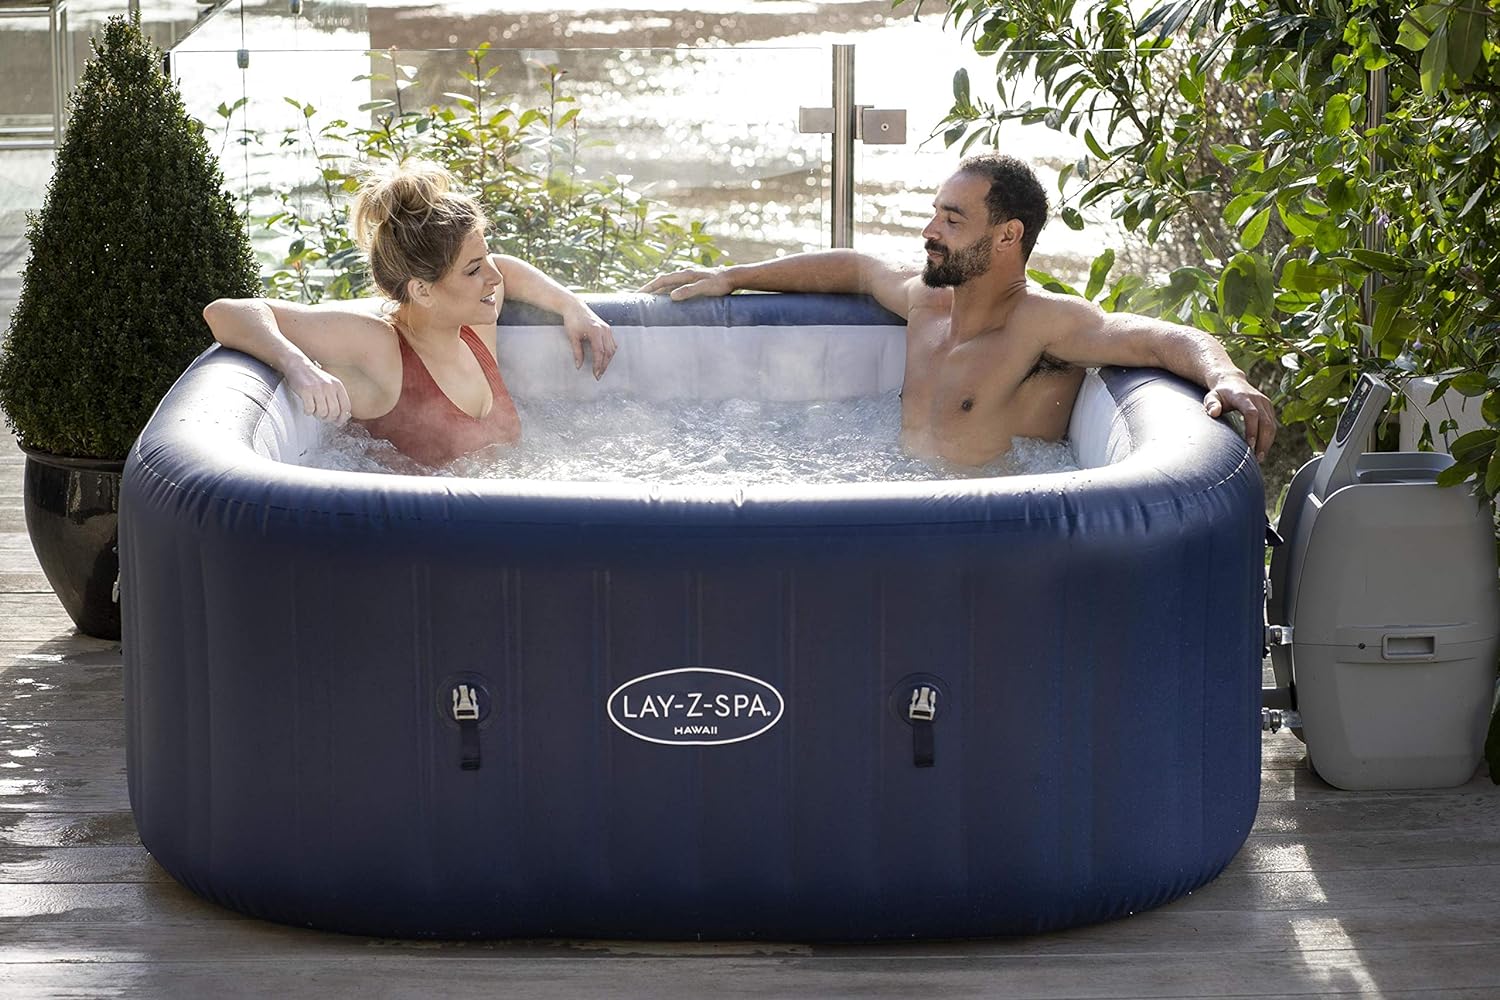 Lay-Z-Spa Hawaii Hot Tub, 140 AirJet Massage System Inflatable Spa with Freeze Shield Technology and Sociable Square Shape, 4-6 Person, Blue